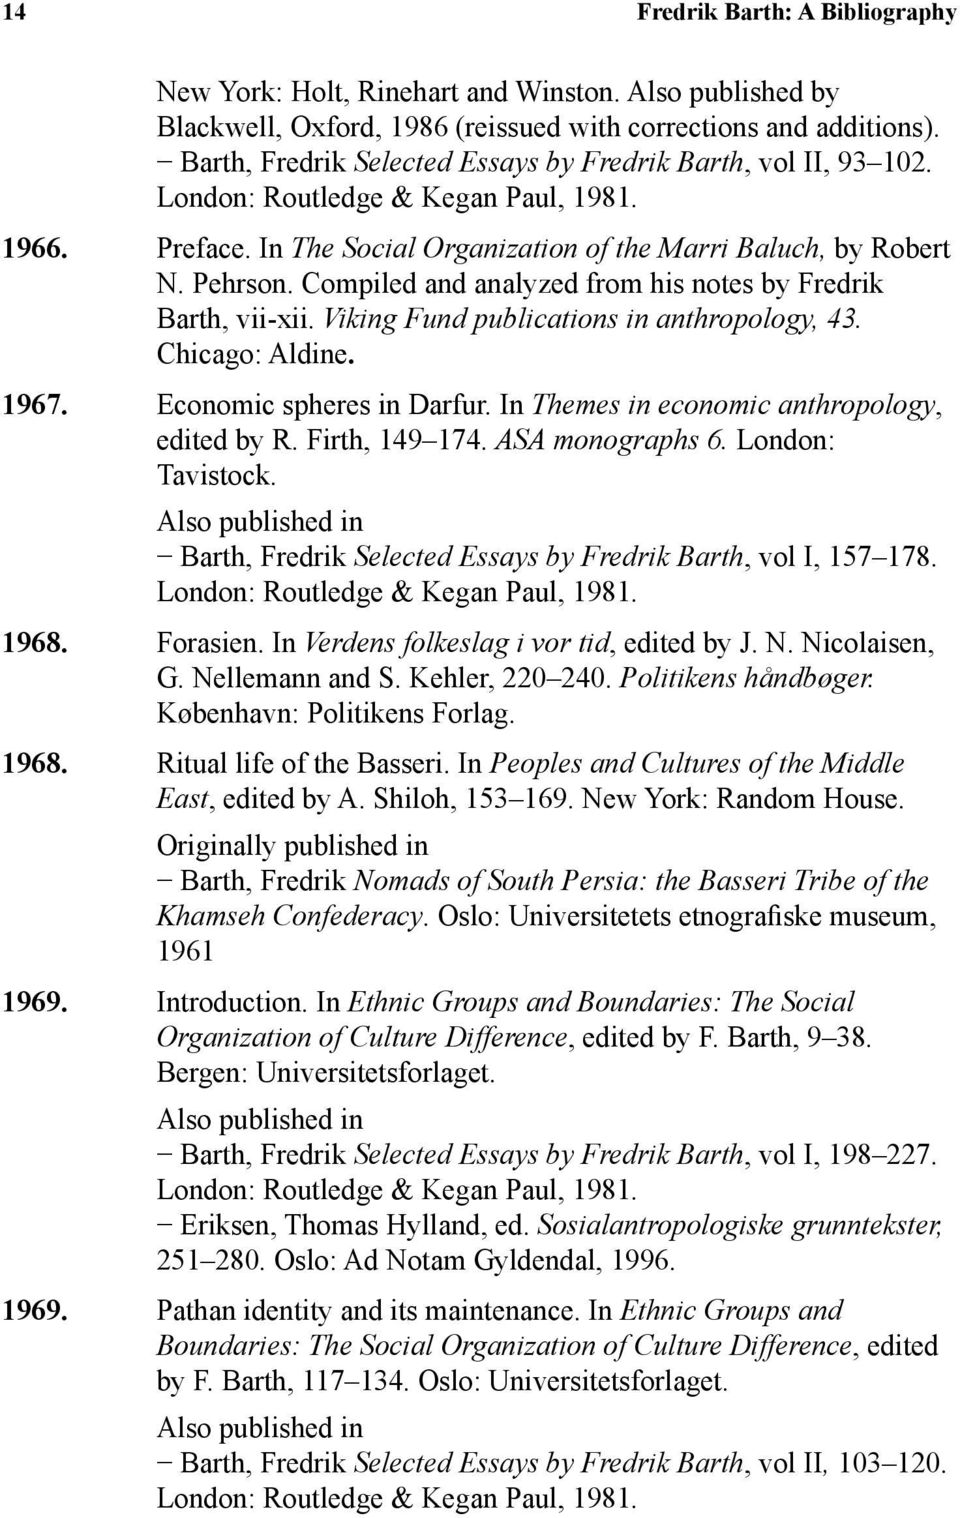 Compiled and analyzed from his notes by Fredrik Barth, vii-xii. Viking Fund publications in anthropology, 43. Chicago: Aldine. 1967. Economic spheres in Darfur.